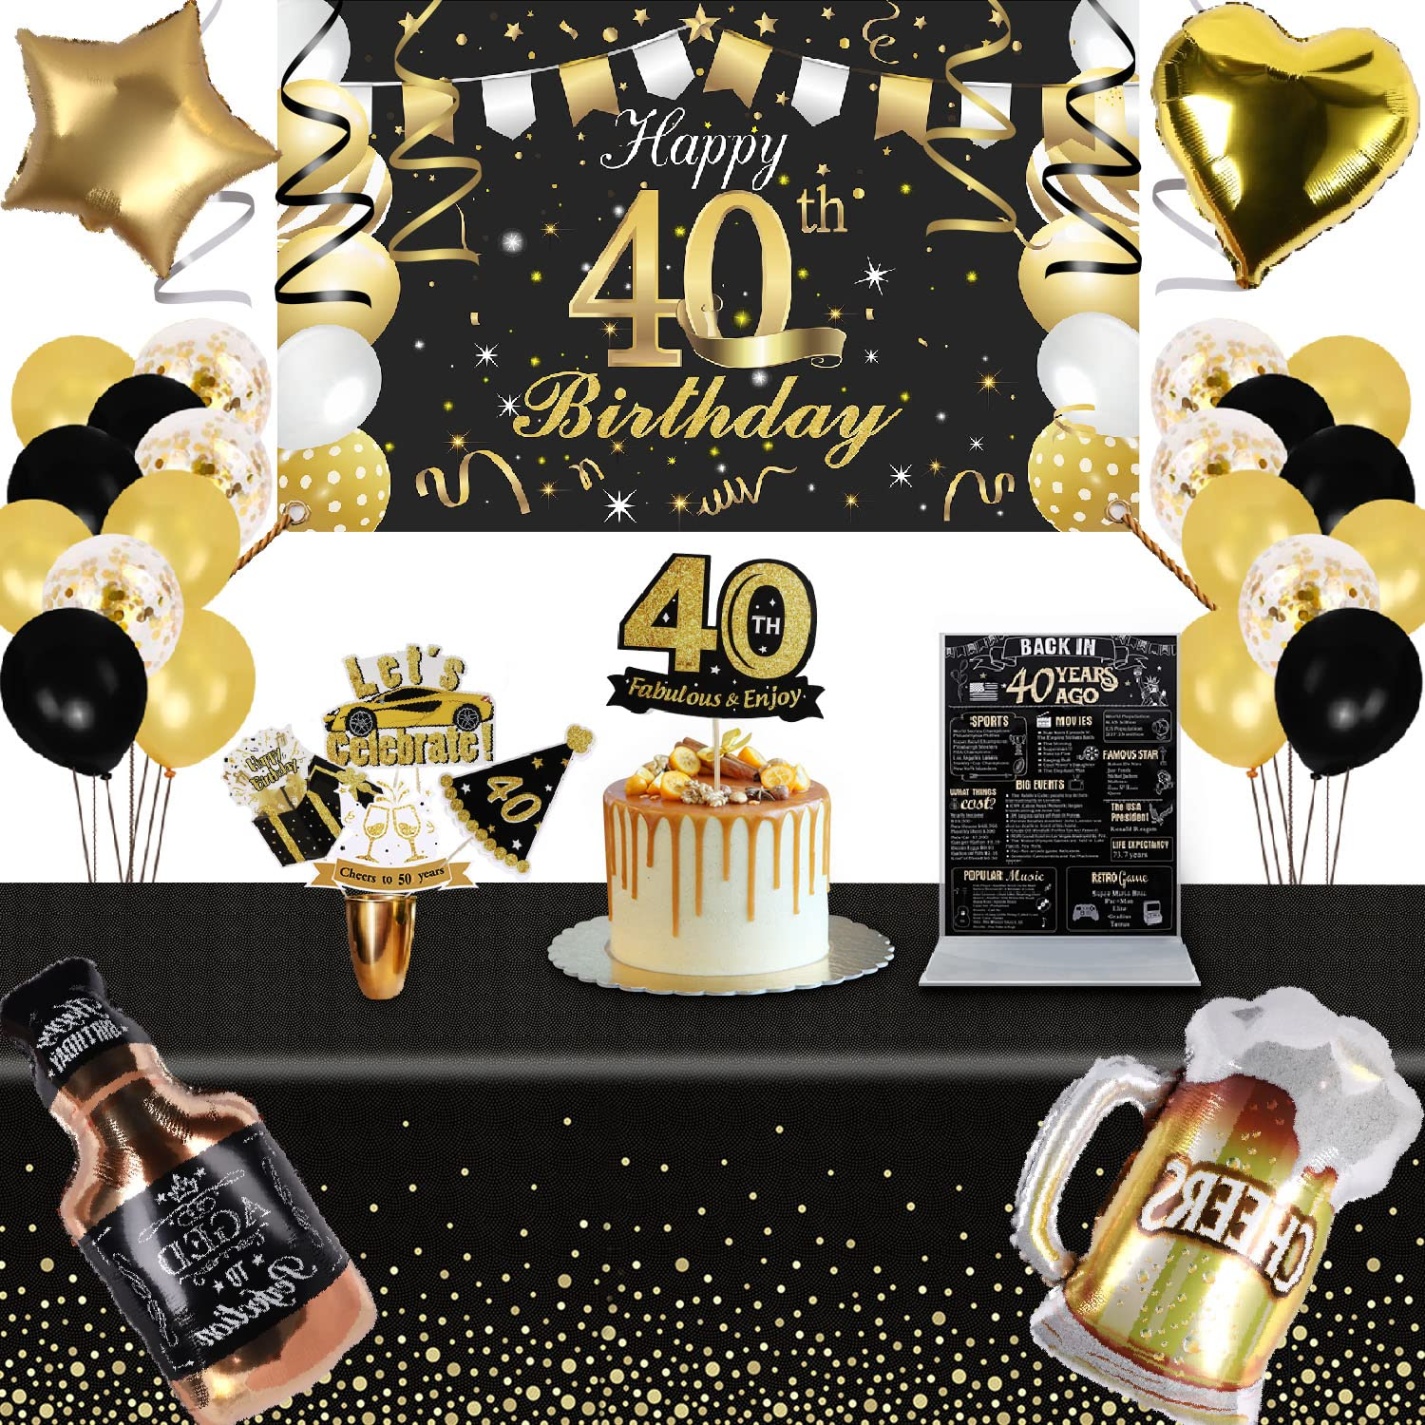 40th birthday decor for him Bulan 1 th Birthday Decorations Men -Happy  Year Old Party Decorations Supplies  with Poster, Backdrop, Tablecloth, Centerpieces Sticks and Hanging Swirl,